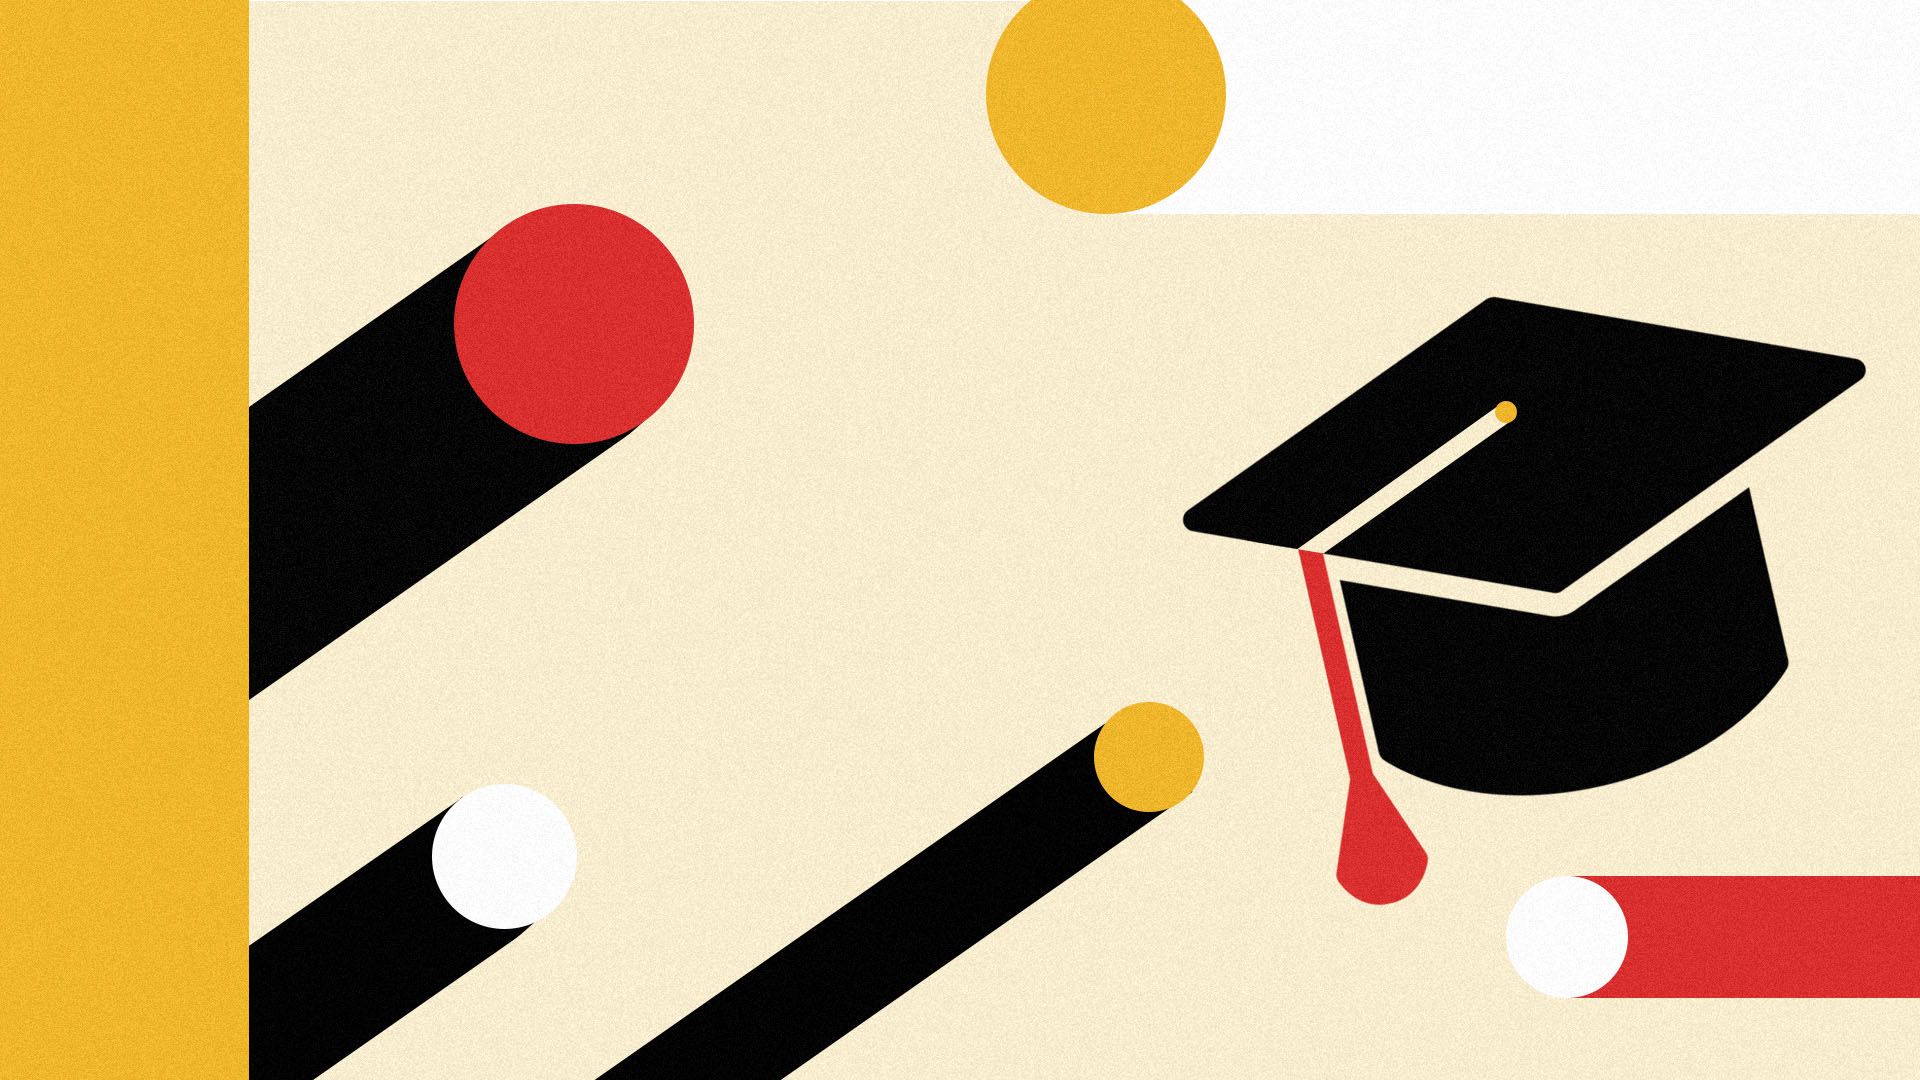 Illustration of a graduation cap surrounded by abstract colors and shapes